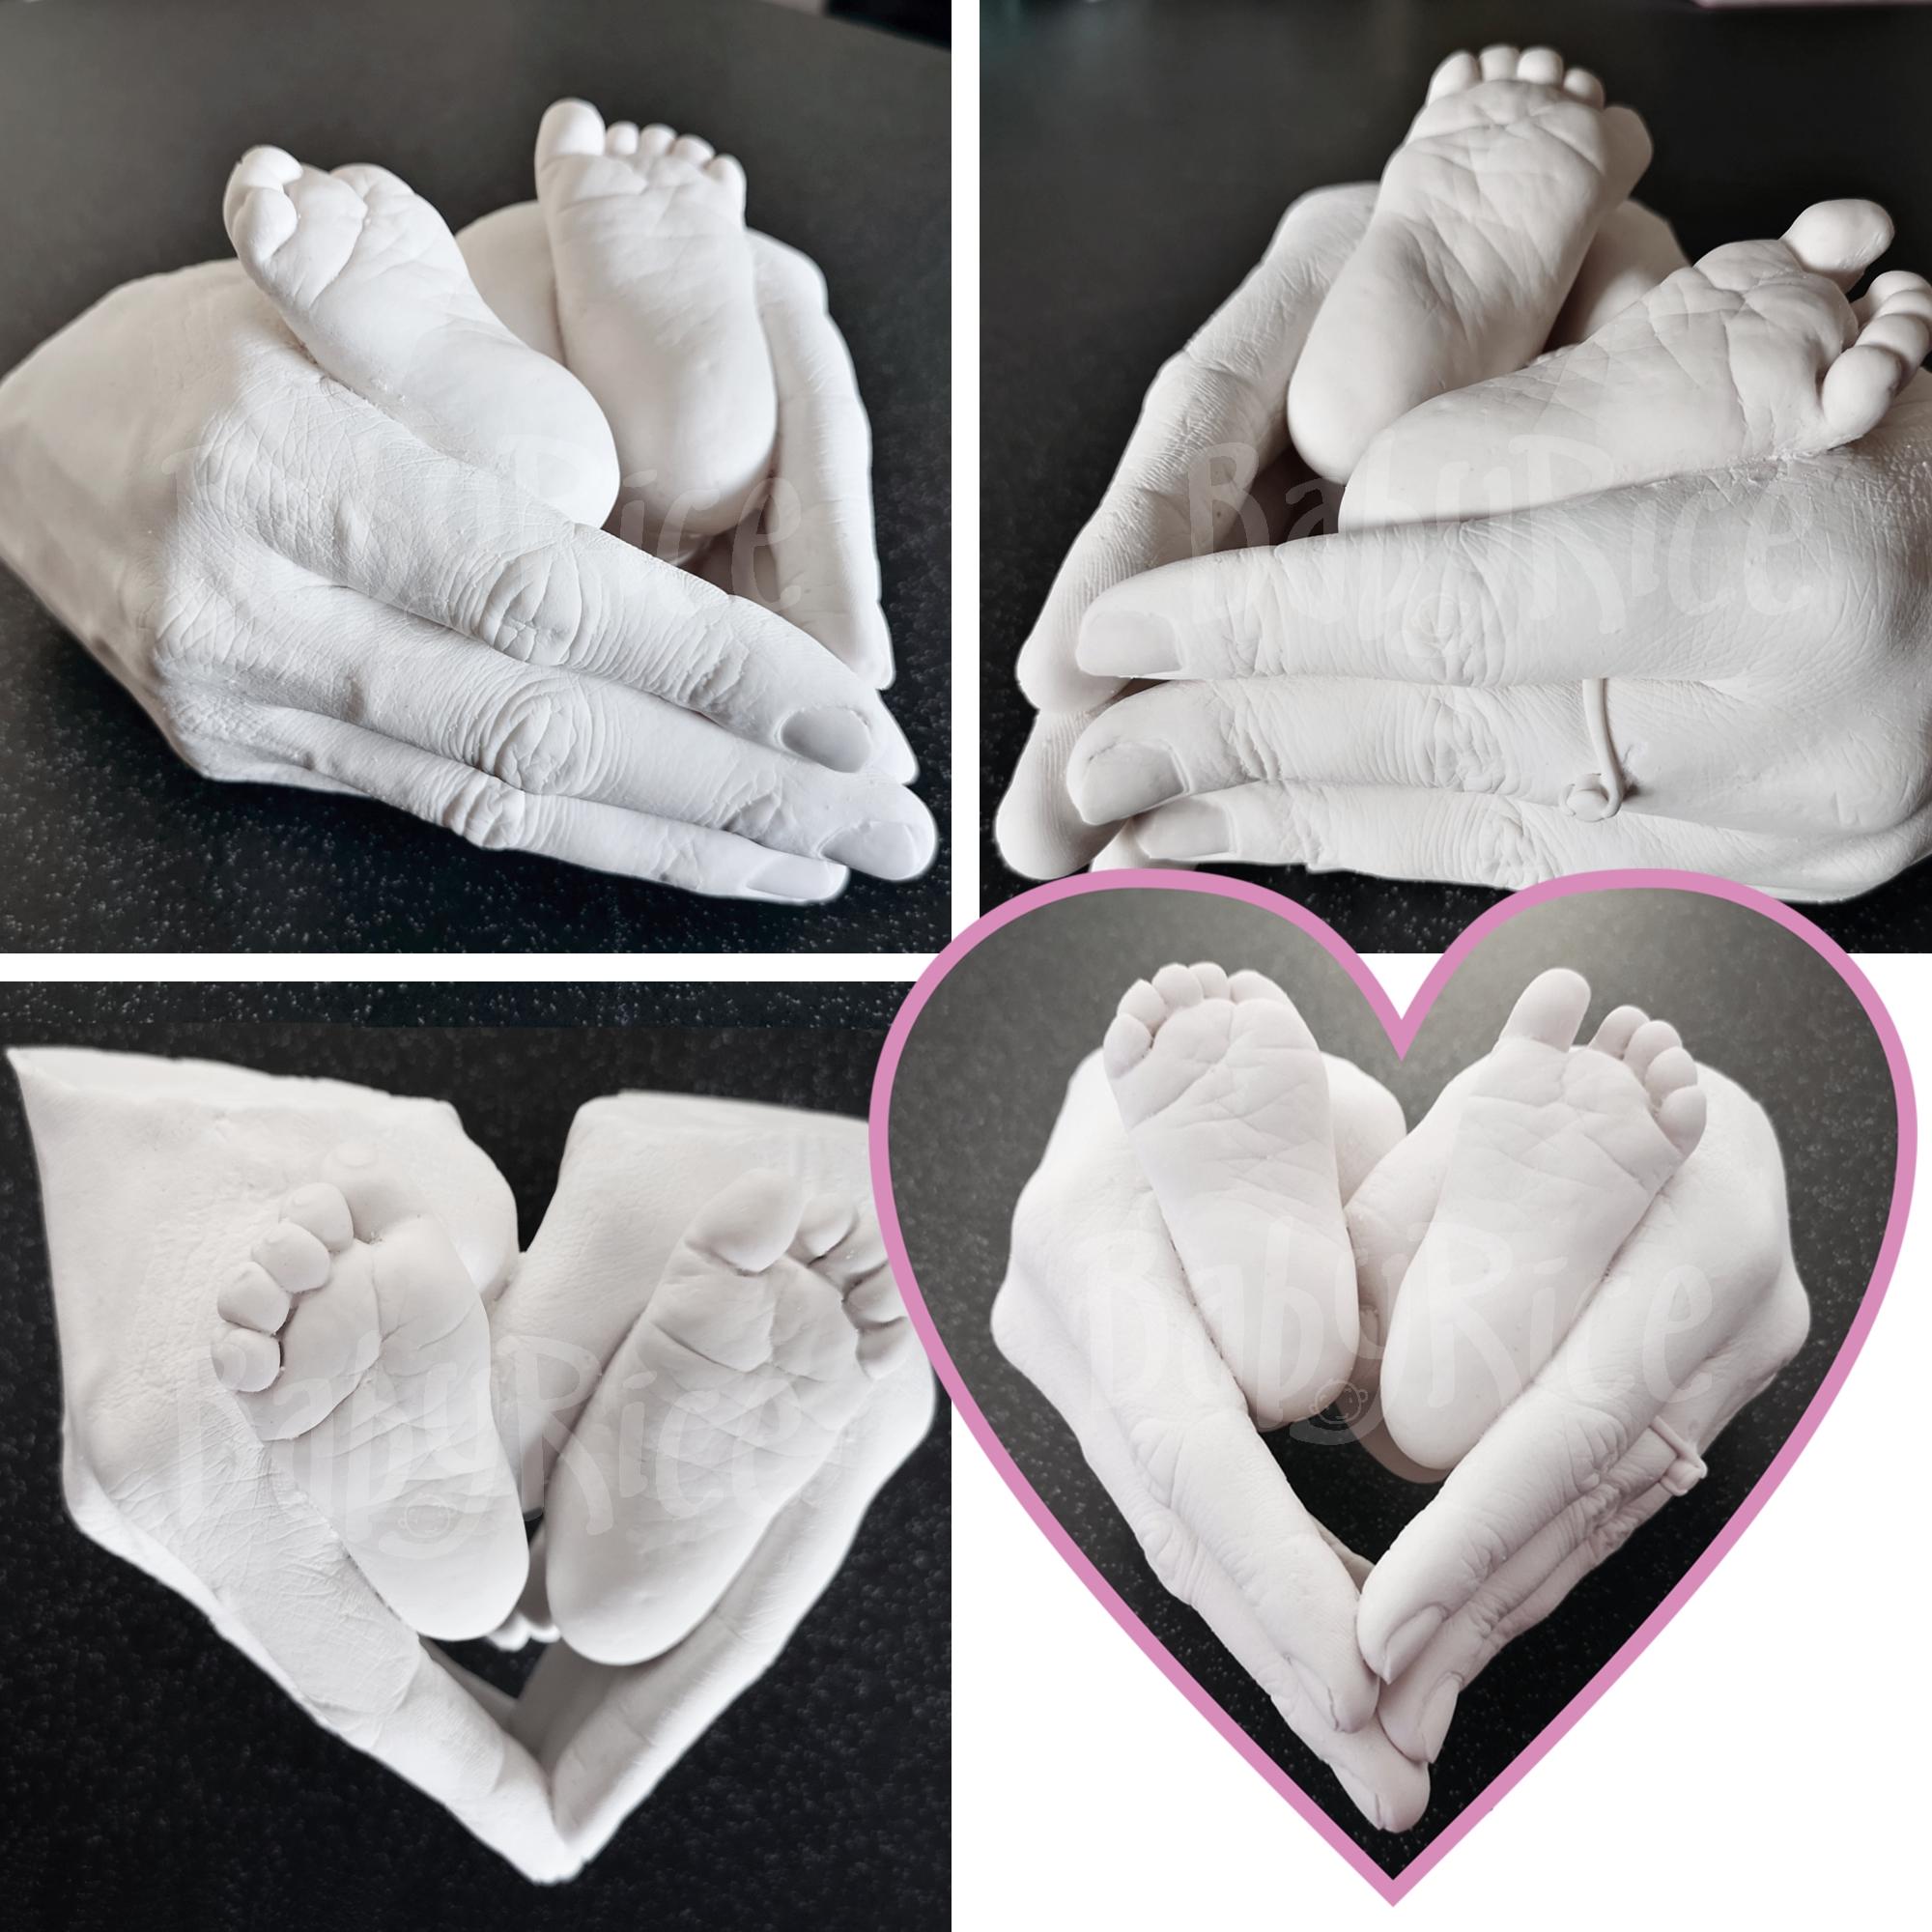 Hand Casting Kit For Couples - Complete DIY Plaster Mold & Painting Set  Home Hand Casting Kit For Couples Or Family, Paint & Mounting Plaque  Included